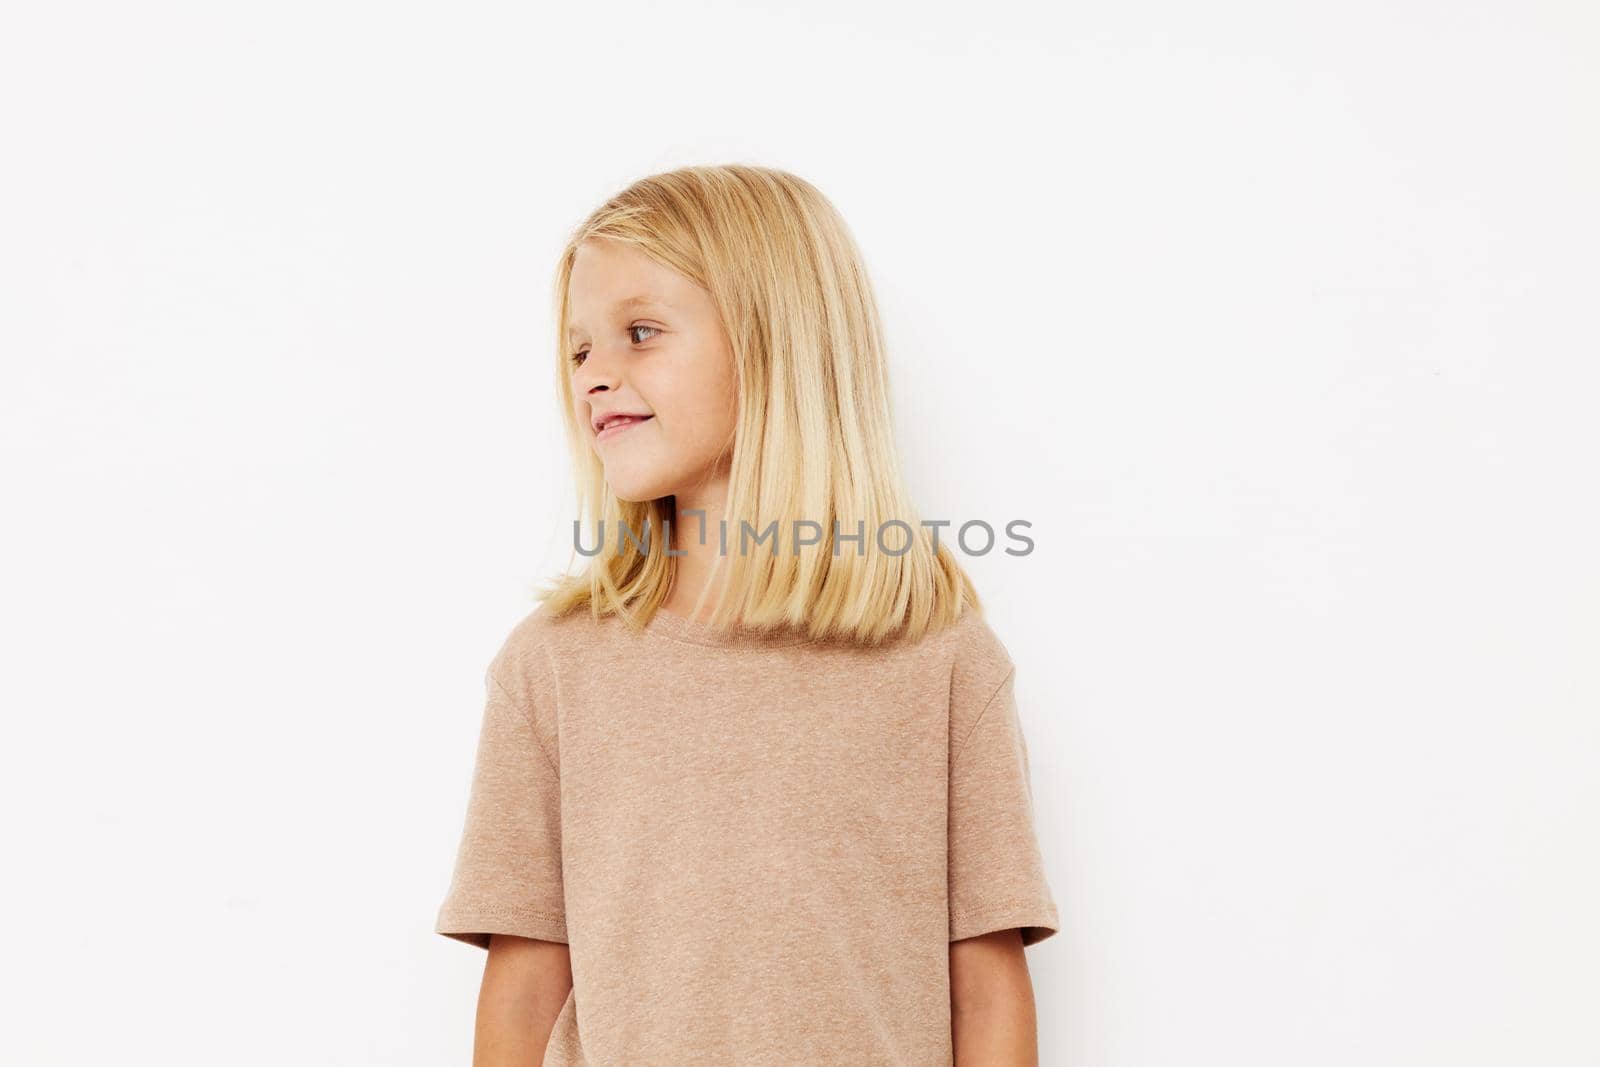 Portrait of a smiling little cutie in a beige t-shirt lifestyle concept. High quality photo